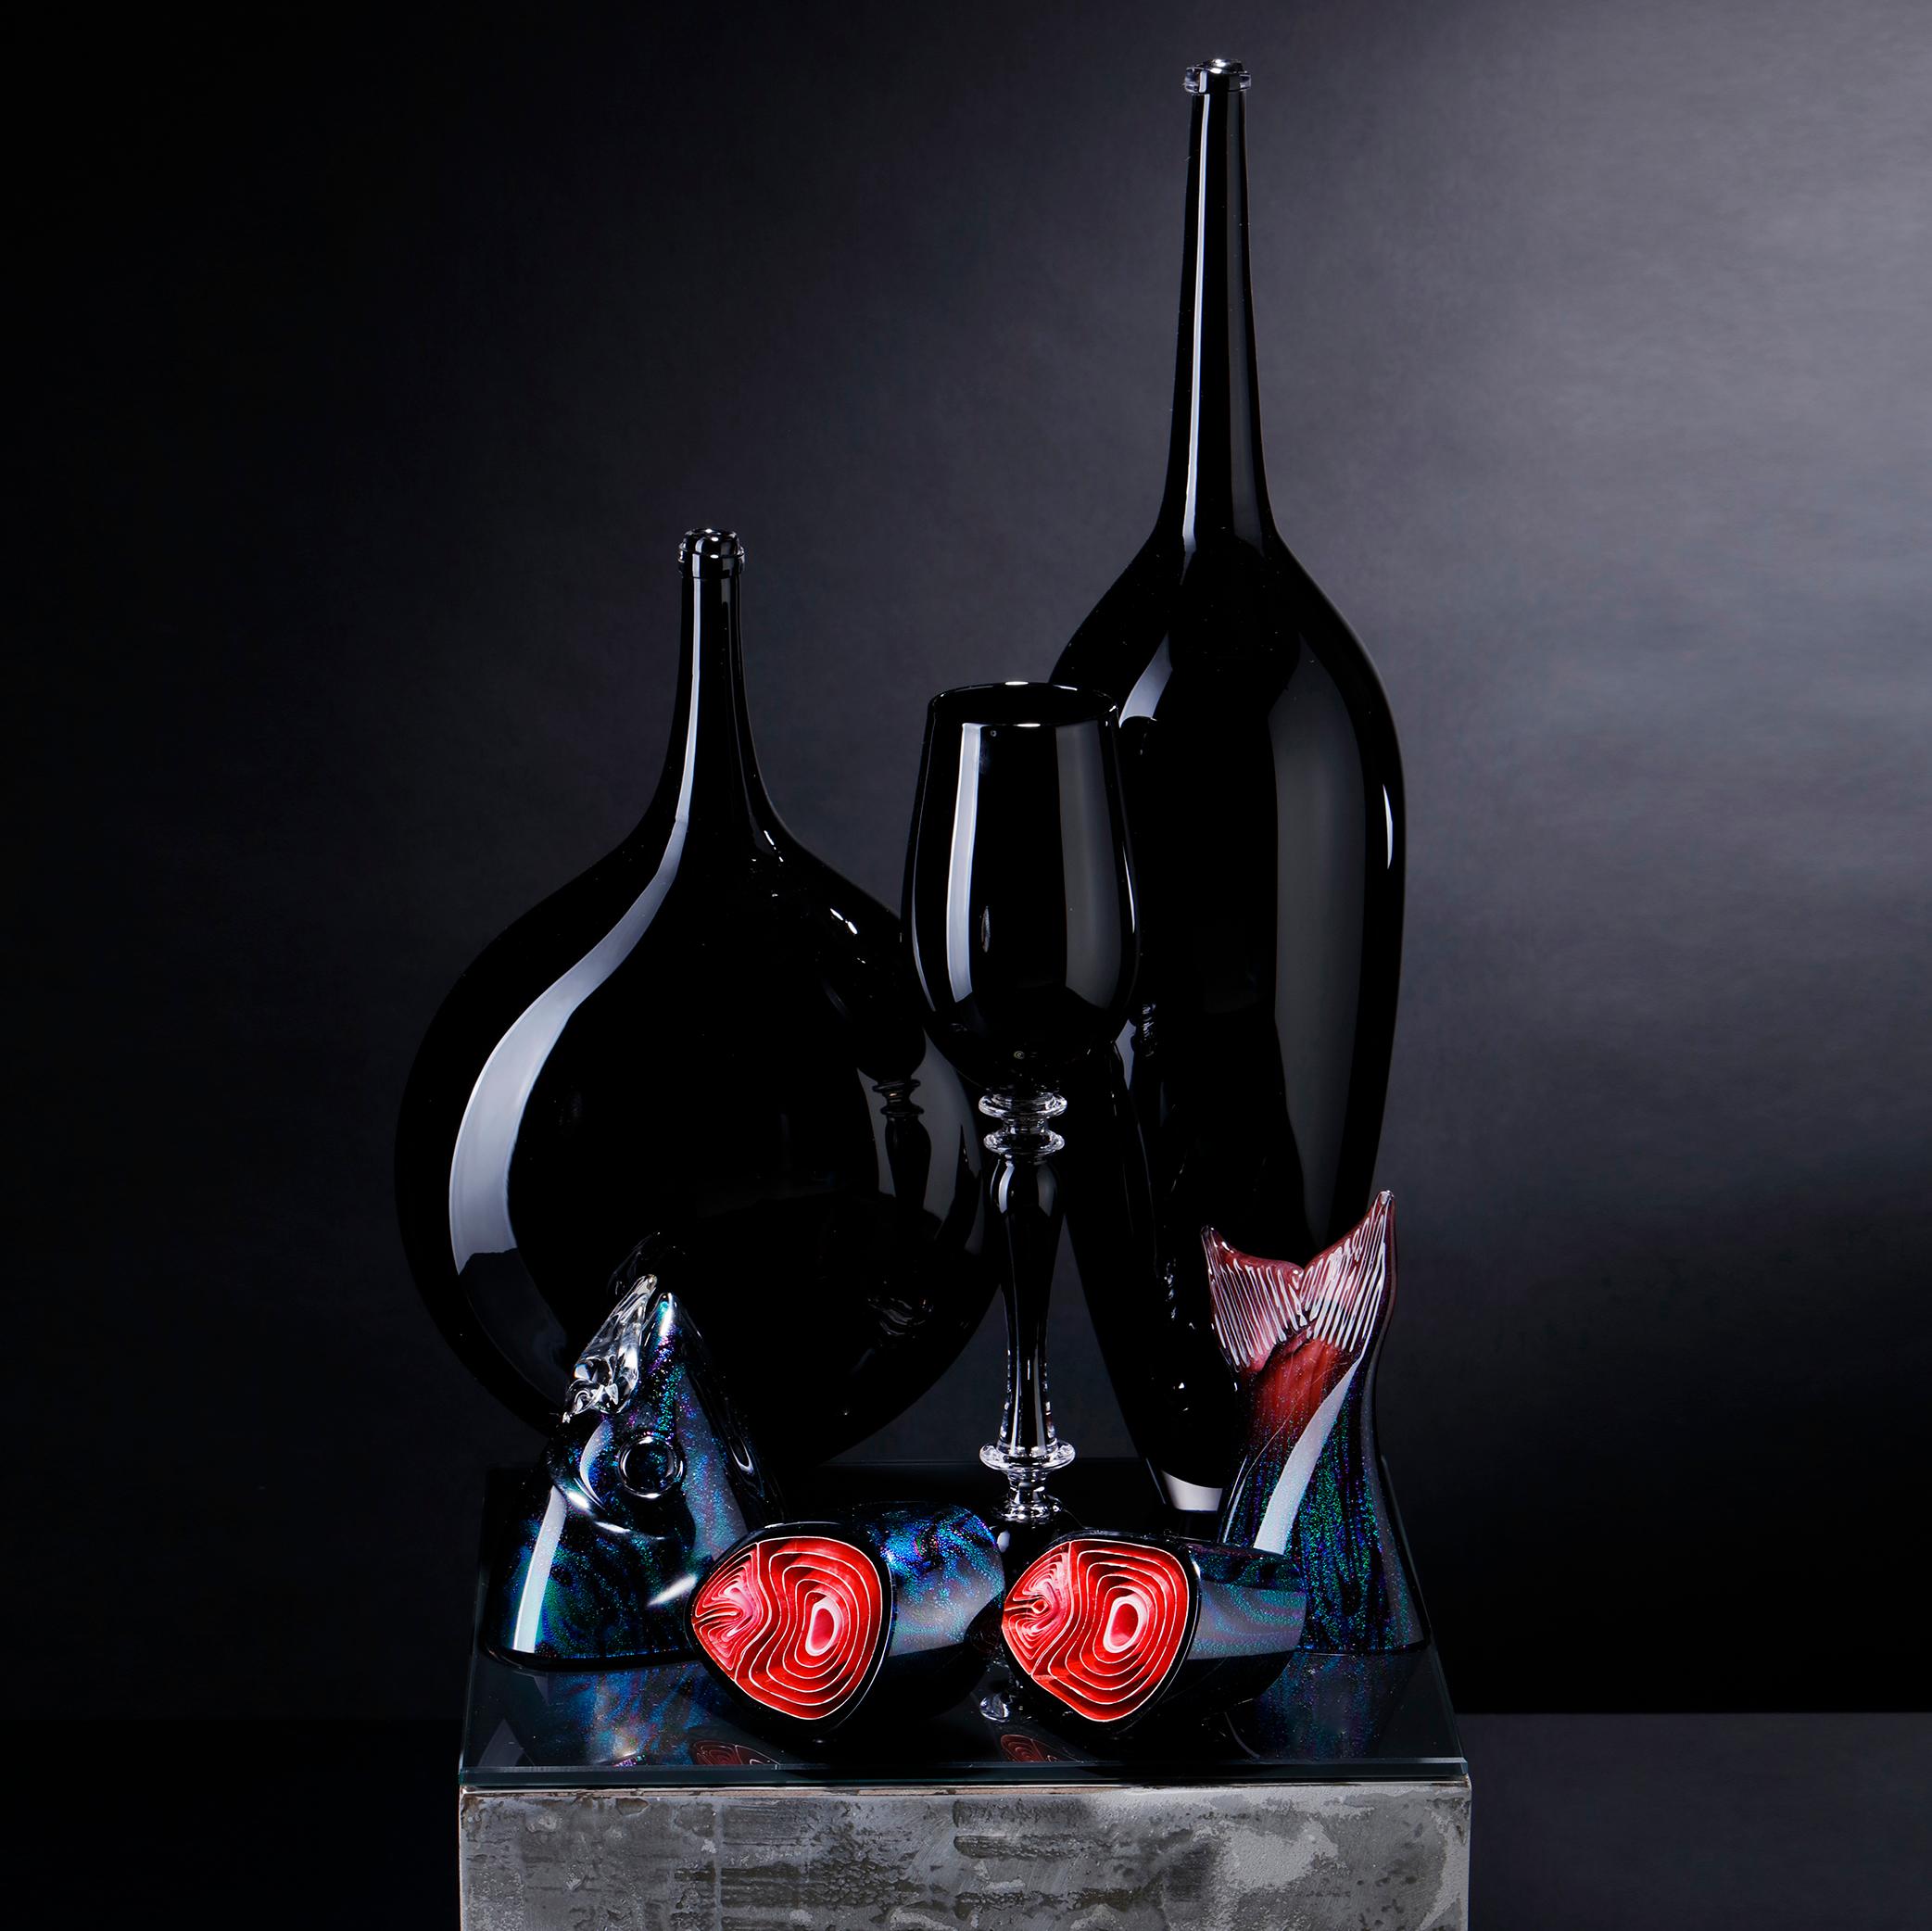 Contemporary Still Life with Fish, a Black and Red Glass Still Life Art Work by Elliot Walker